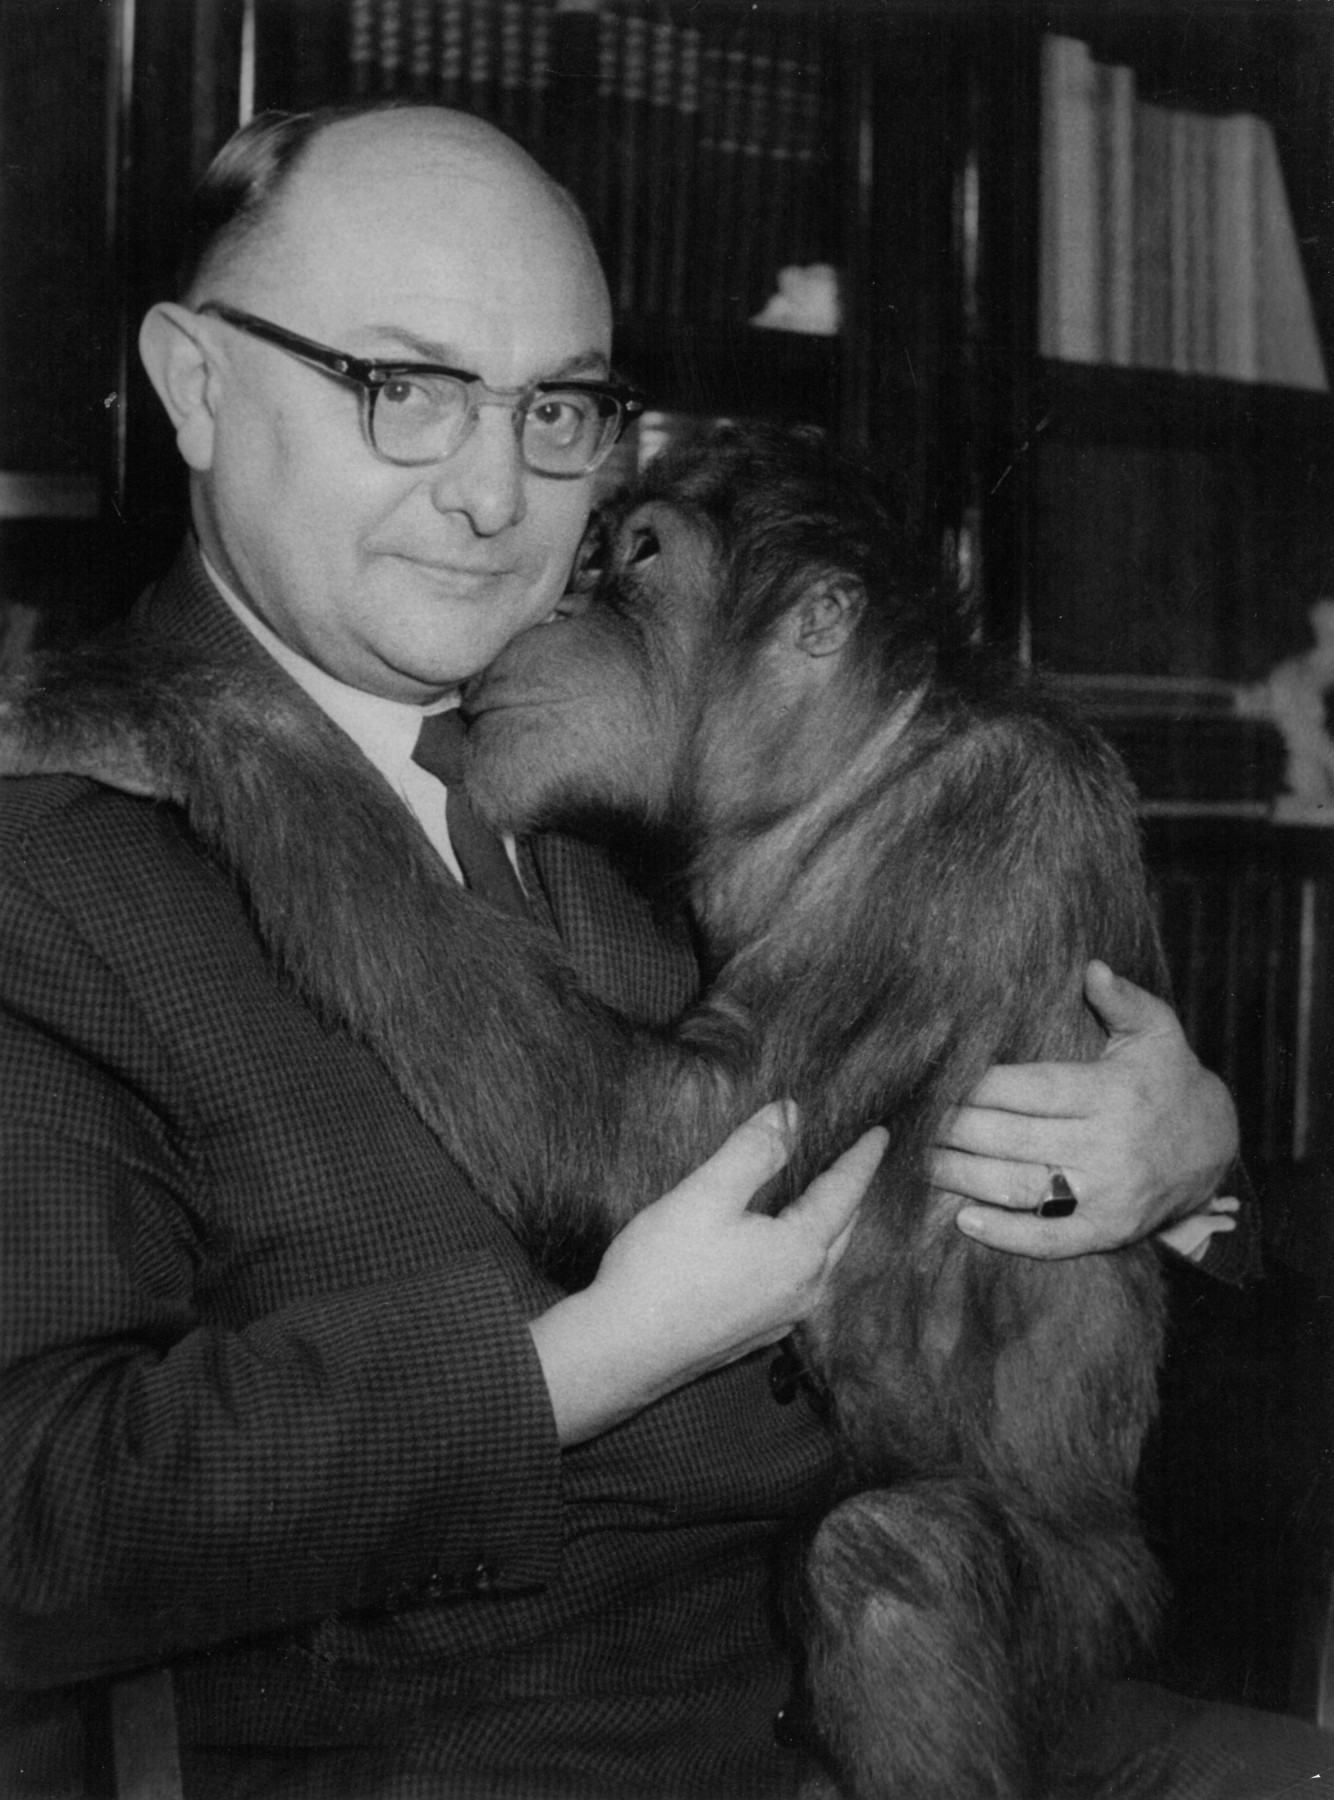 A man with a bald head and glasses holds a monkey in his arms, which snuggles up to him.